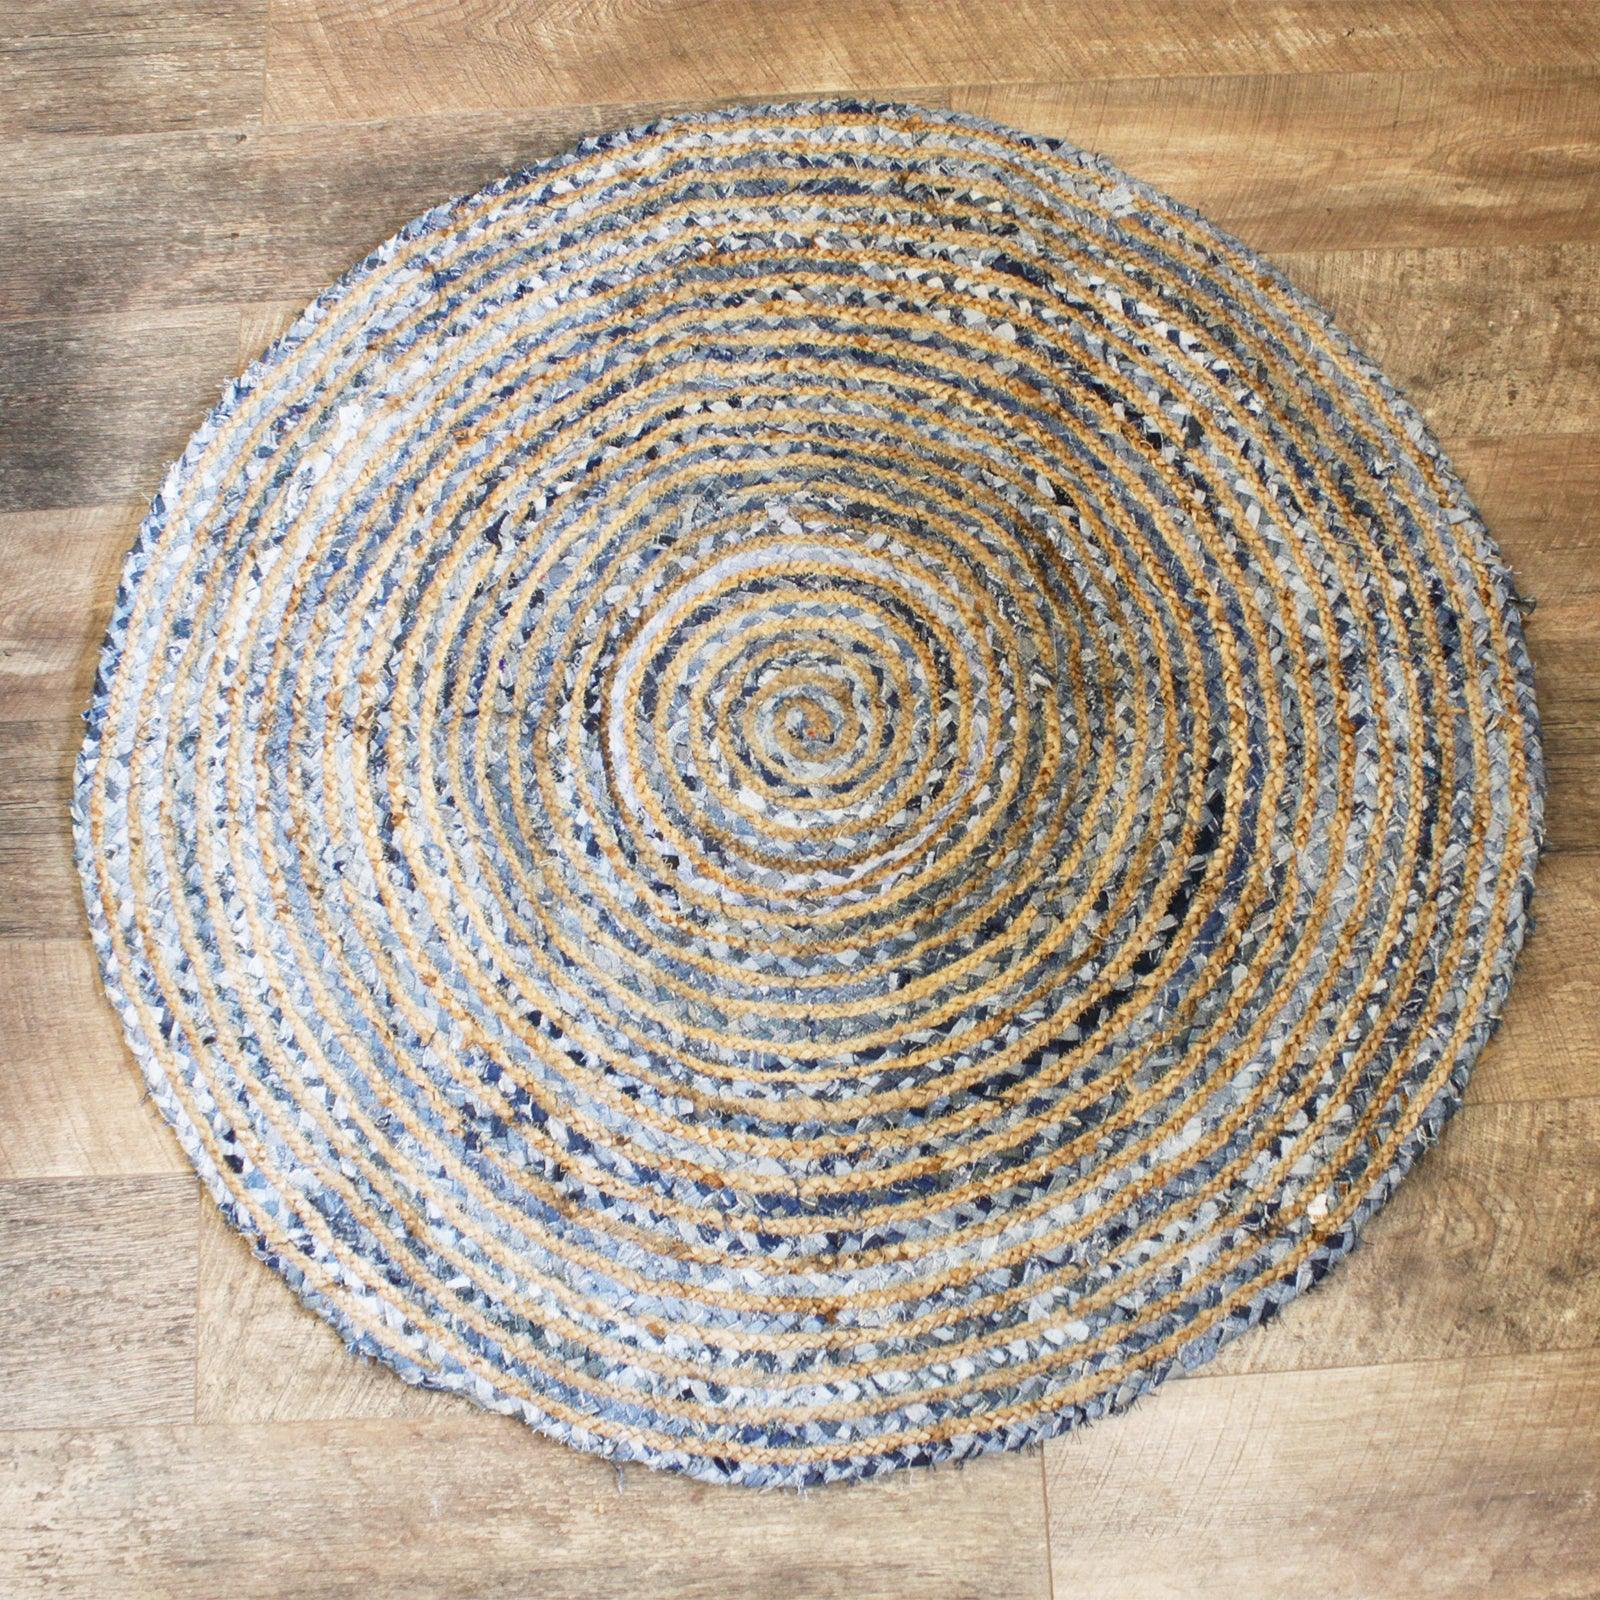 Round Jute and Recycles Denim Rug - 120 cm - DuvetDay.co.uk